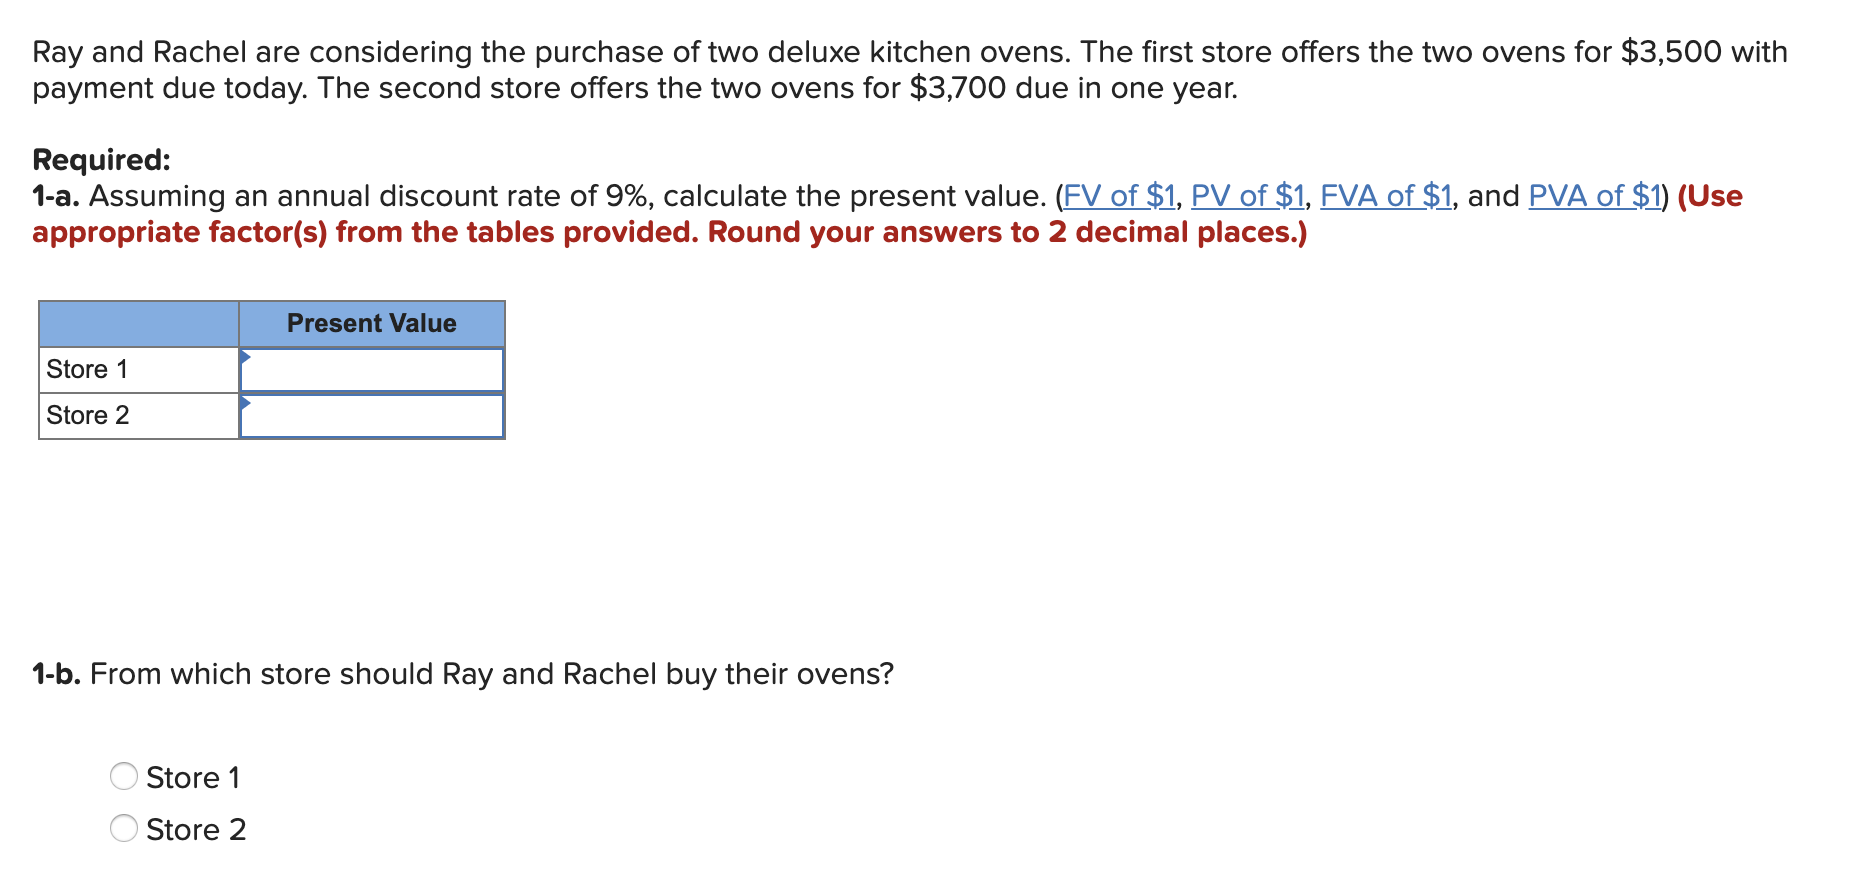 Ray and Rachel are considering the purchase of two deluxe kitchen ovens. The first store offers thee two ovens for $3,500 with
payment due today. The second store offers the two ovens for $3,700 due in one year.
Required:
1-a. Assuming an annual discount rate of 9%, calculate the present value. (FV of $1, PV of $1, FVA of $1, and PVA of $1) (Use
appropriate factor(s) from the tables provided. Round your answers to 2 decimal places.)
Present Value
Store 1
Store 2
1-b. From which store should Ray and Rachel buy their ovens?
Store 1
Store 2
